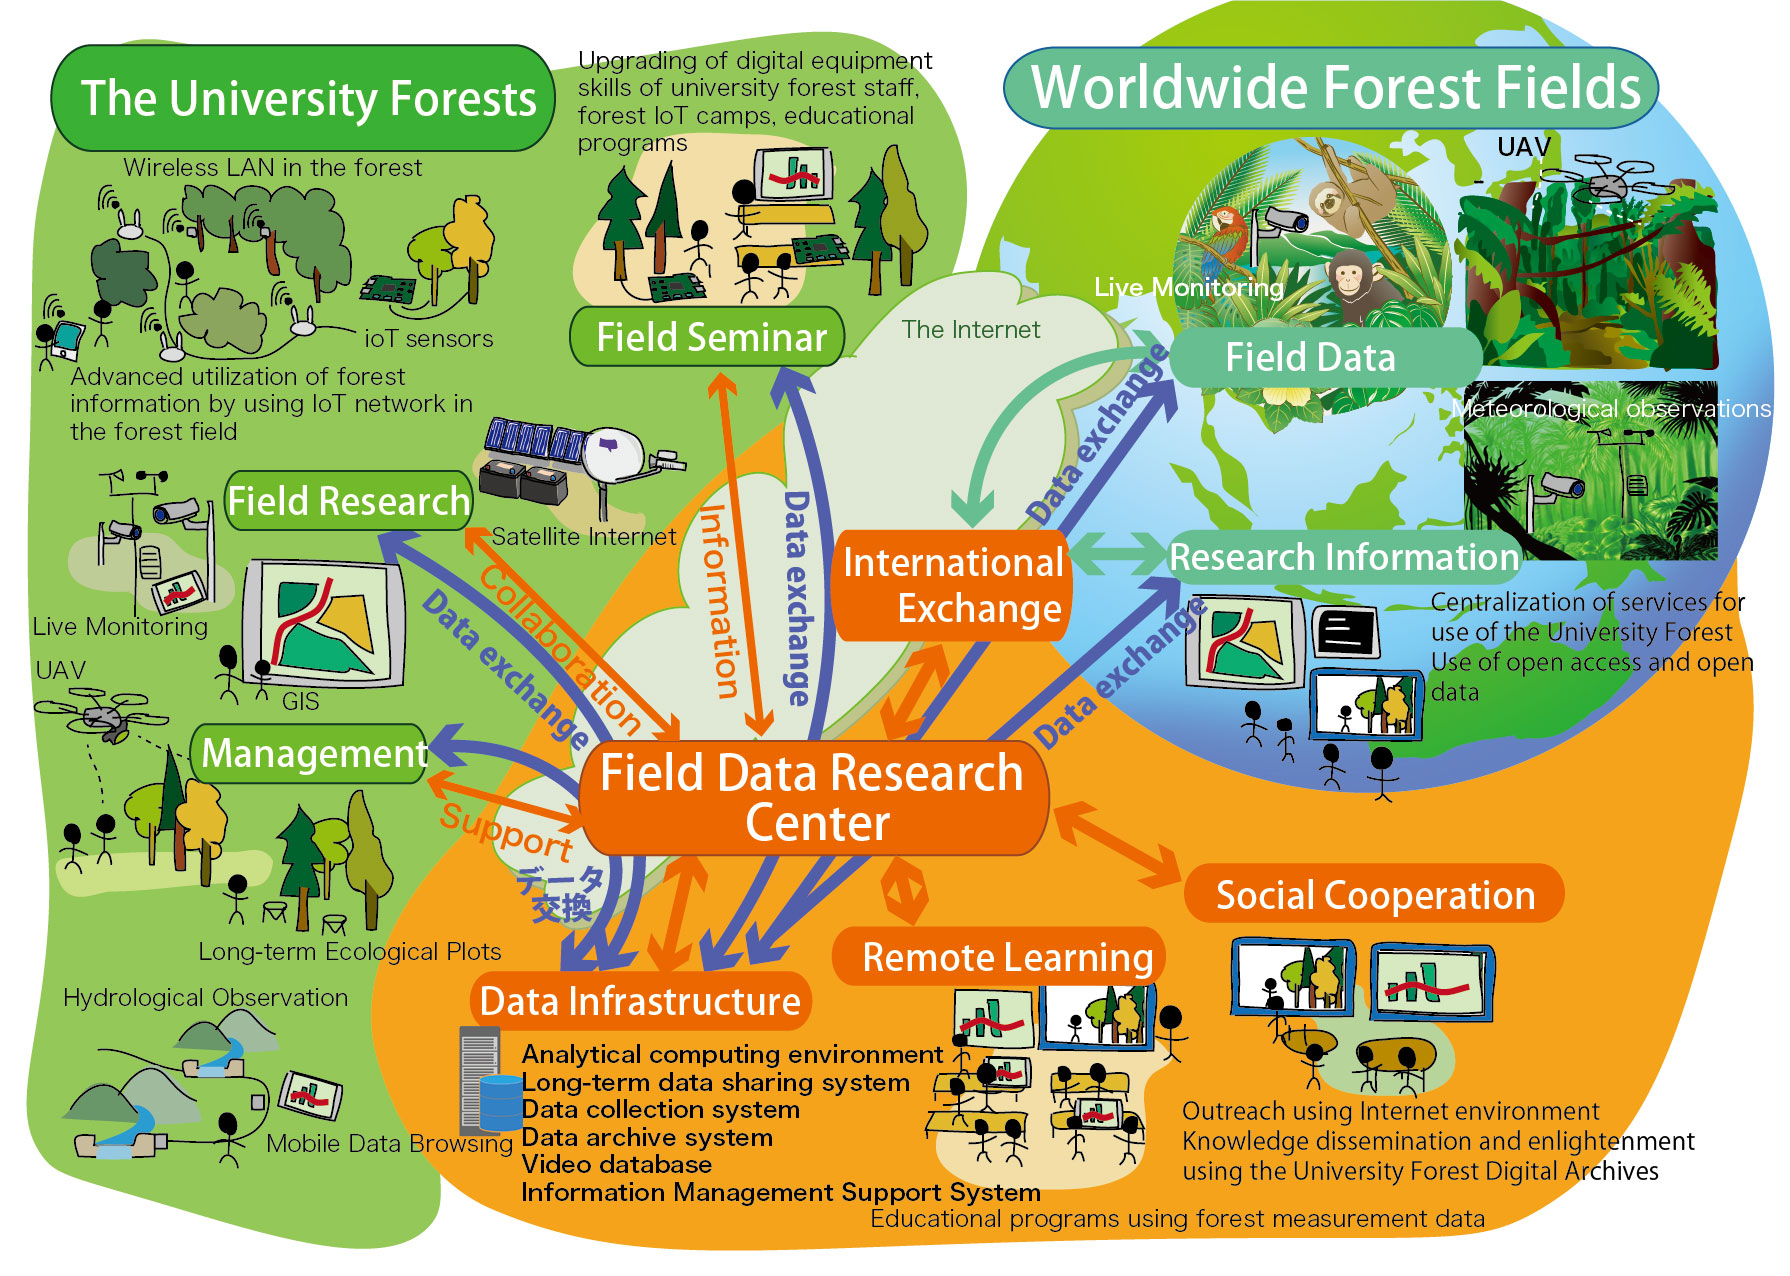 Digital Transformation (DX) of Forest Field Data Management by Field Data Research Center